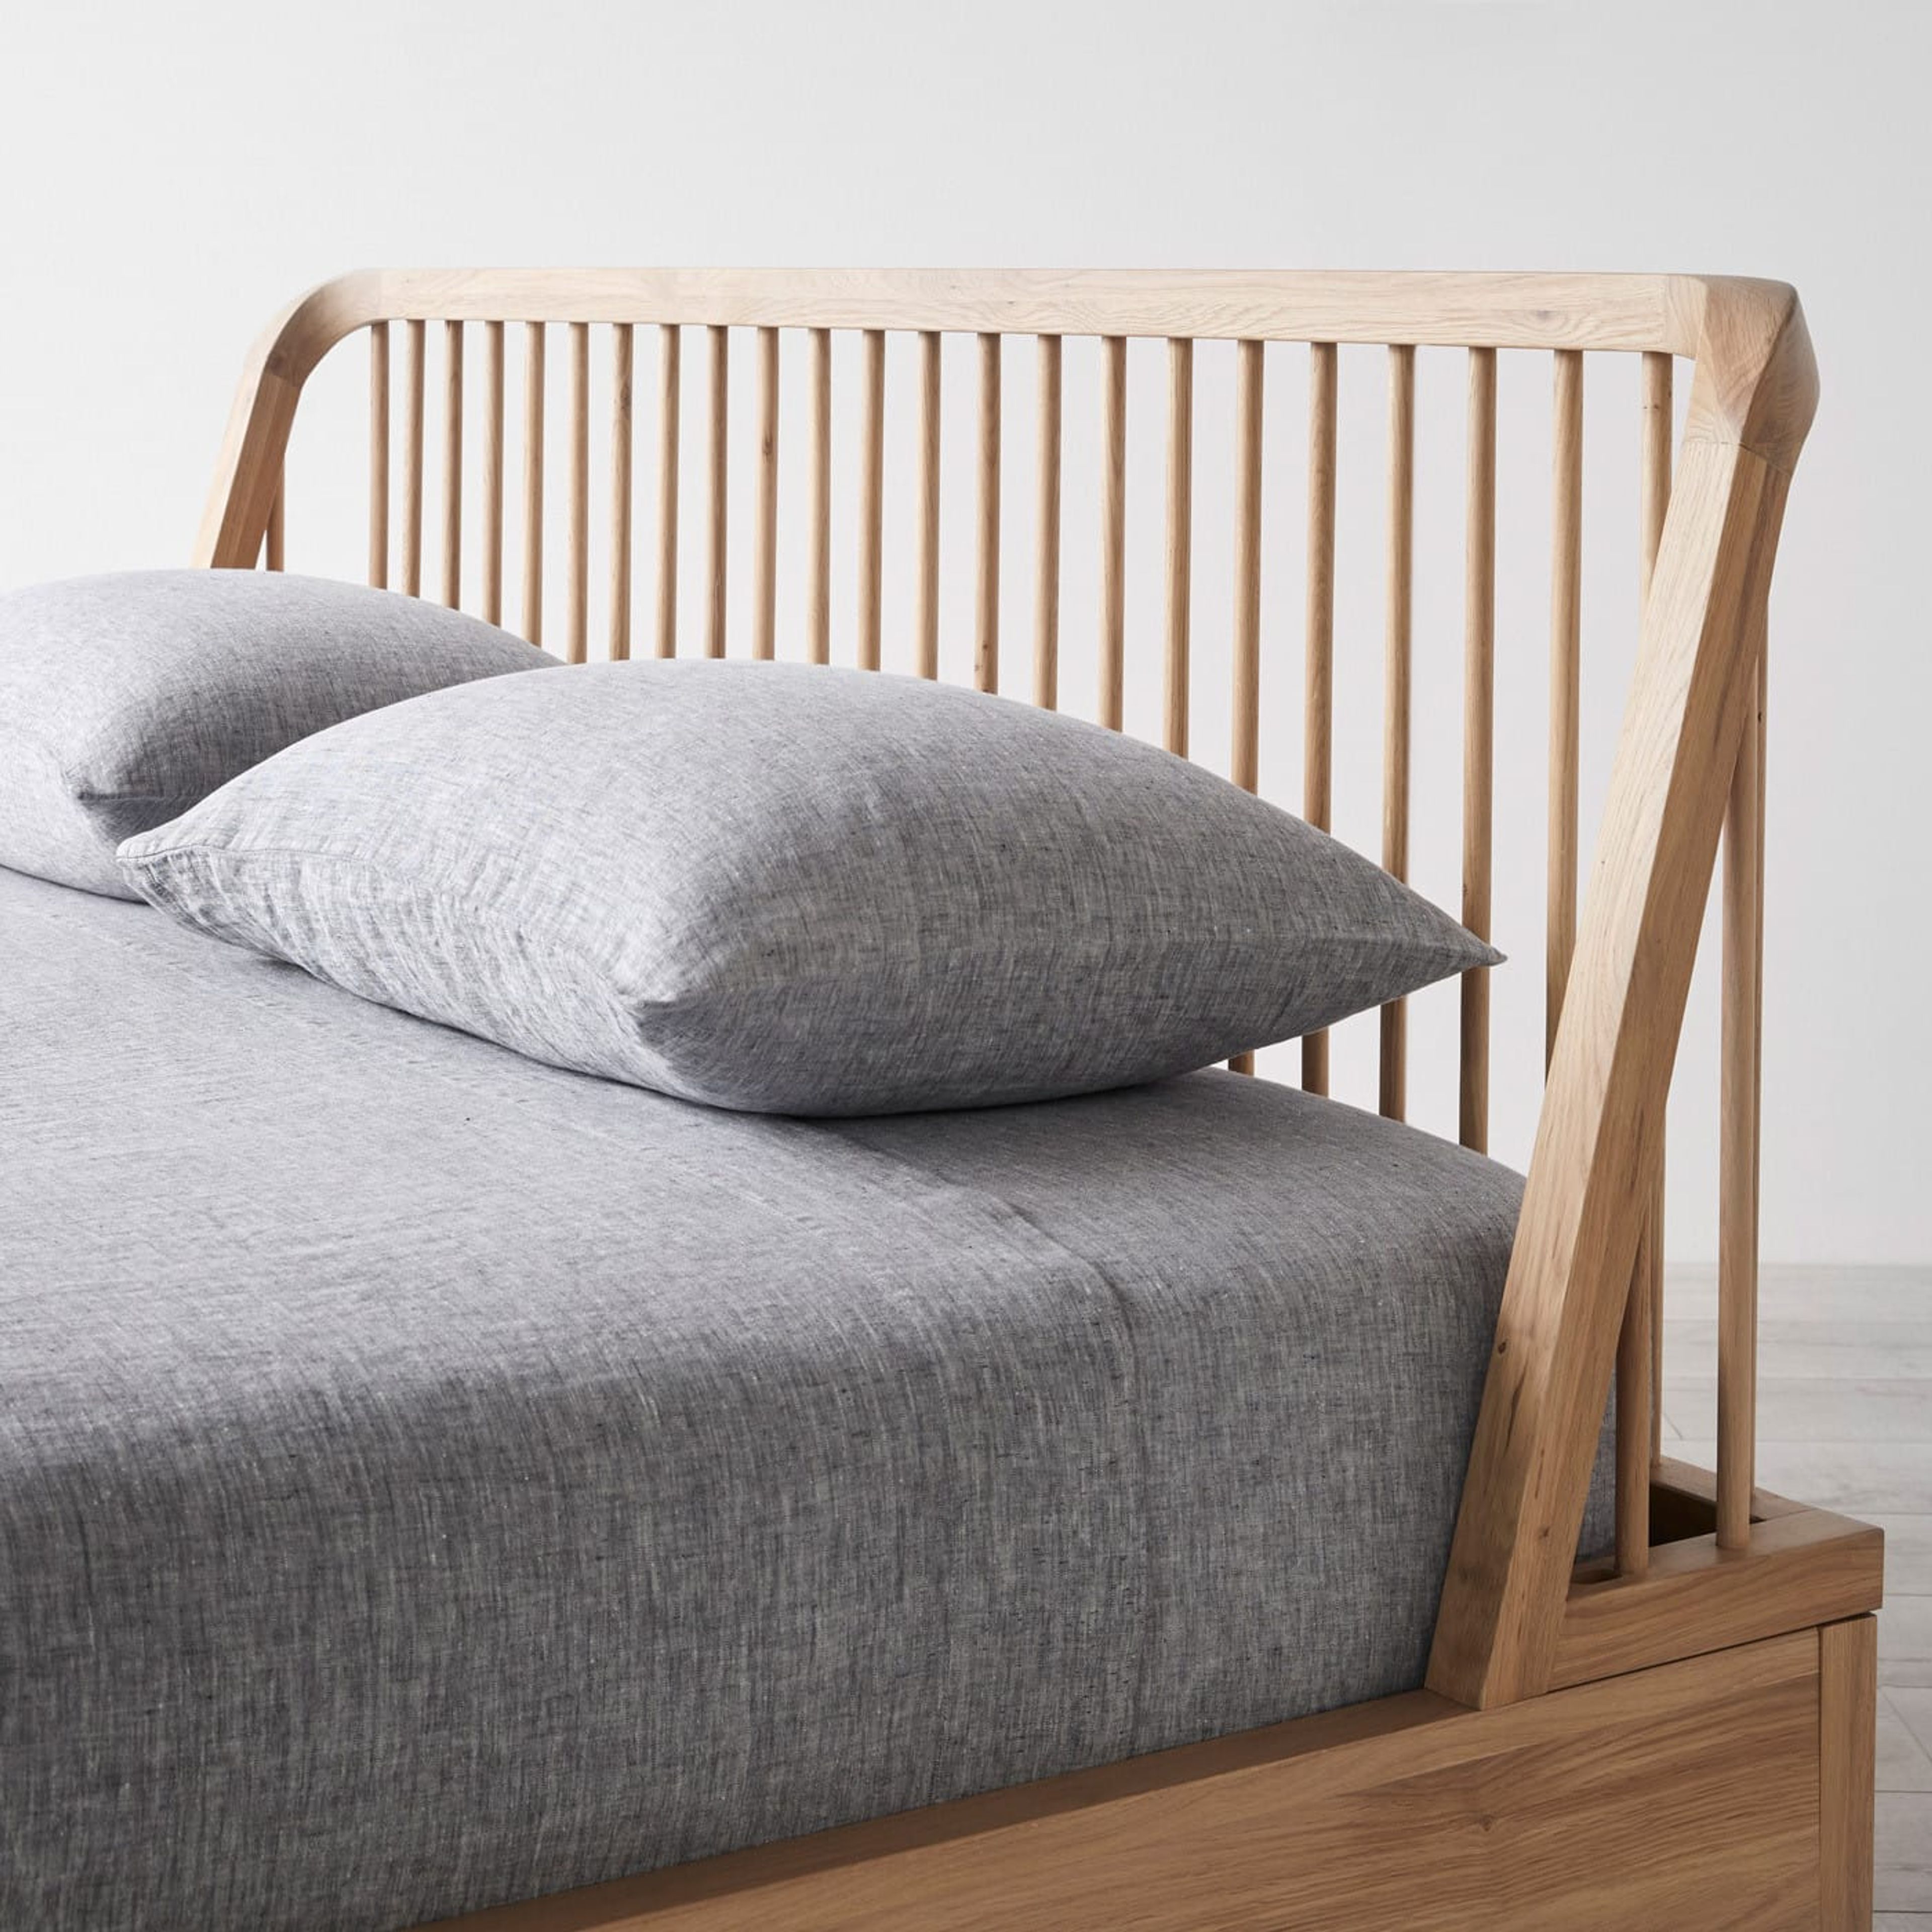 Addison Spindle Bed